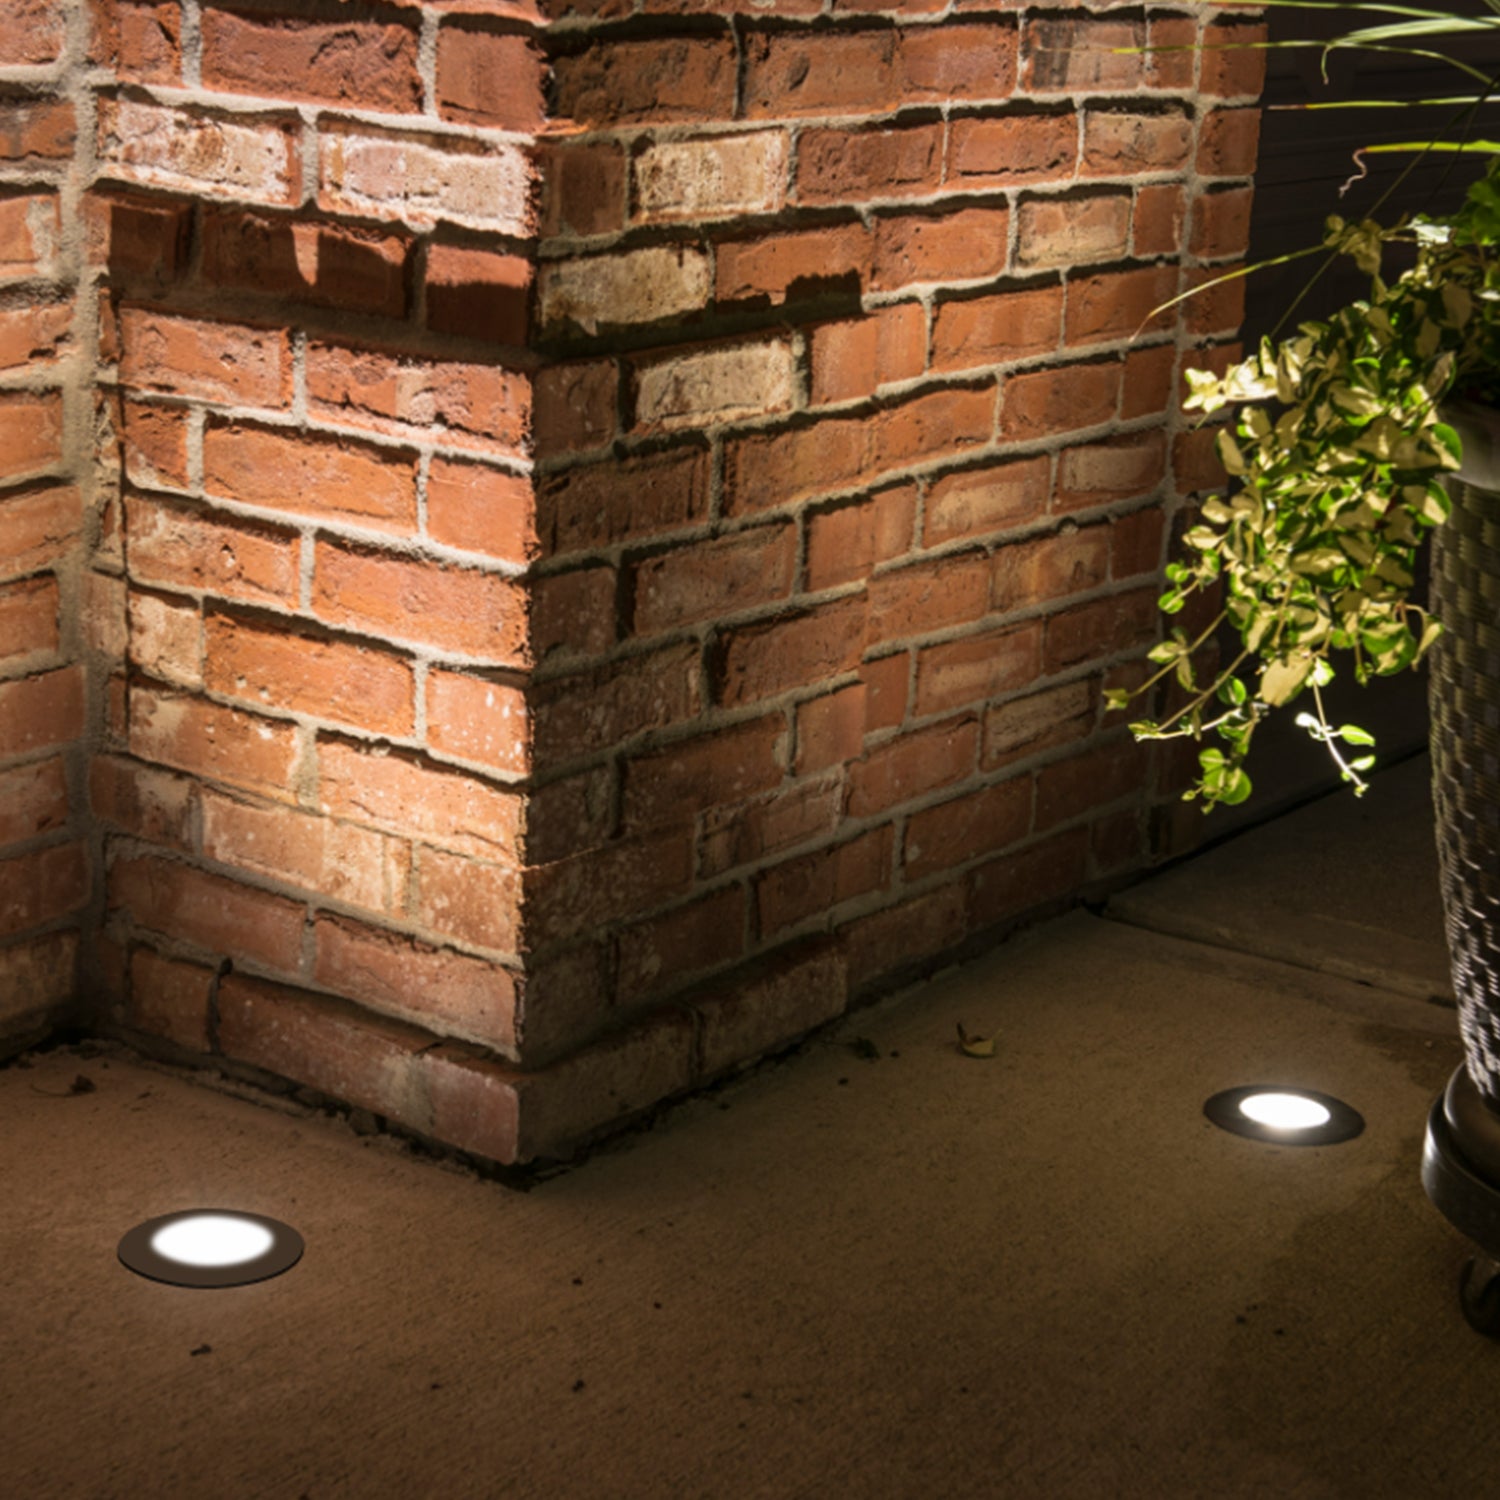 Outdoor brick corner with illuminated in-ground LED well lights highlighting the sidewalk and nearby potted plant